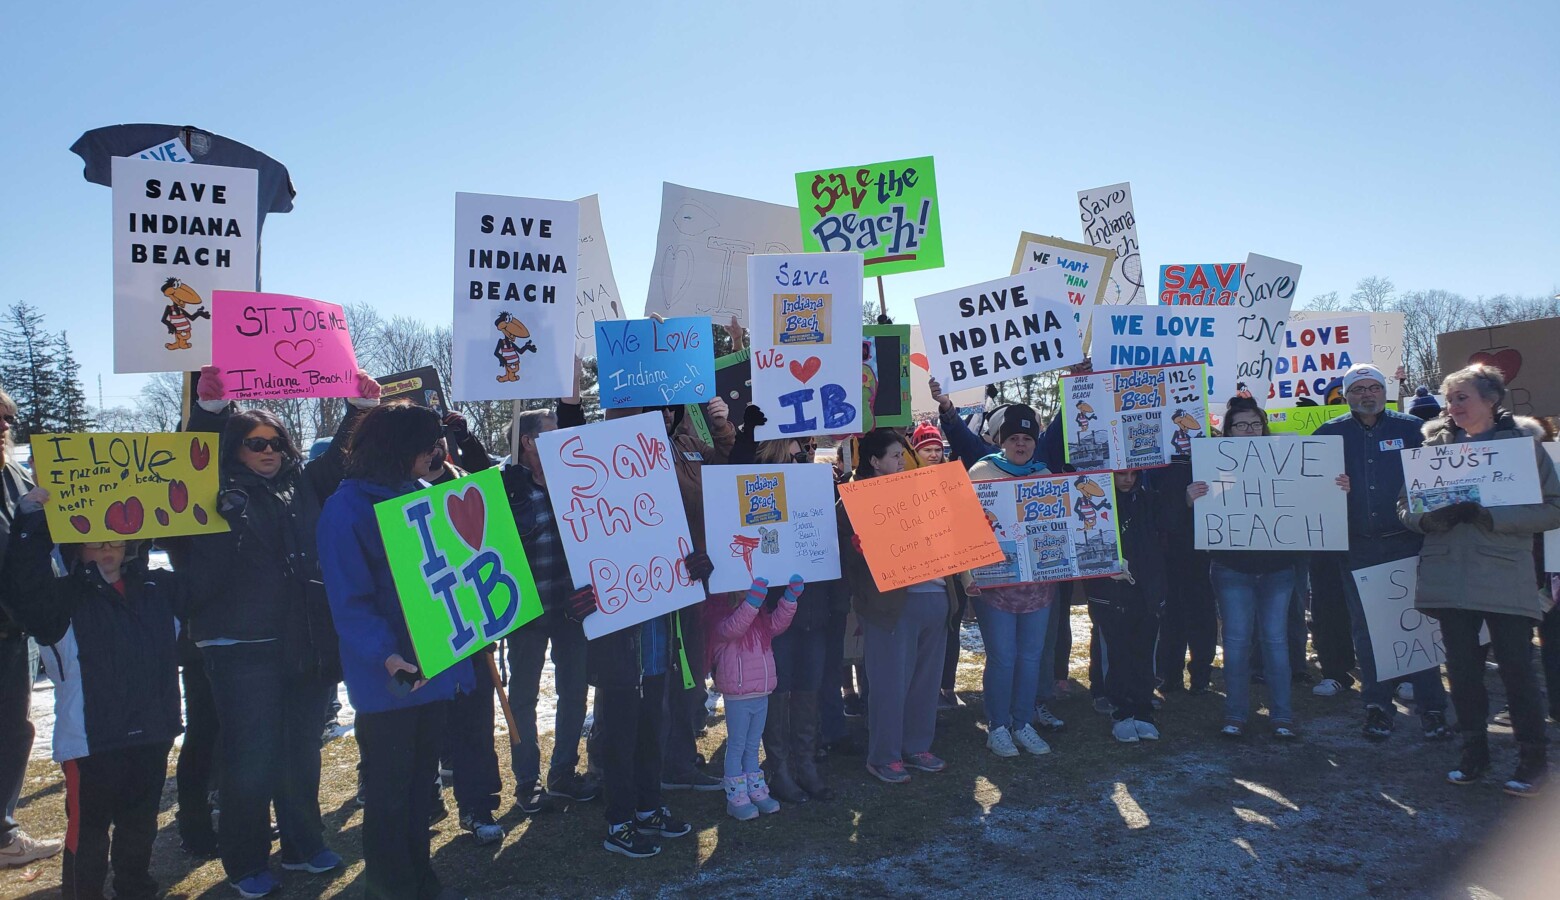 Attendees at Saturday's rally hold signs in support of saving Indiana Beach. (Samantha Horton/IPB News)